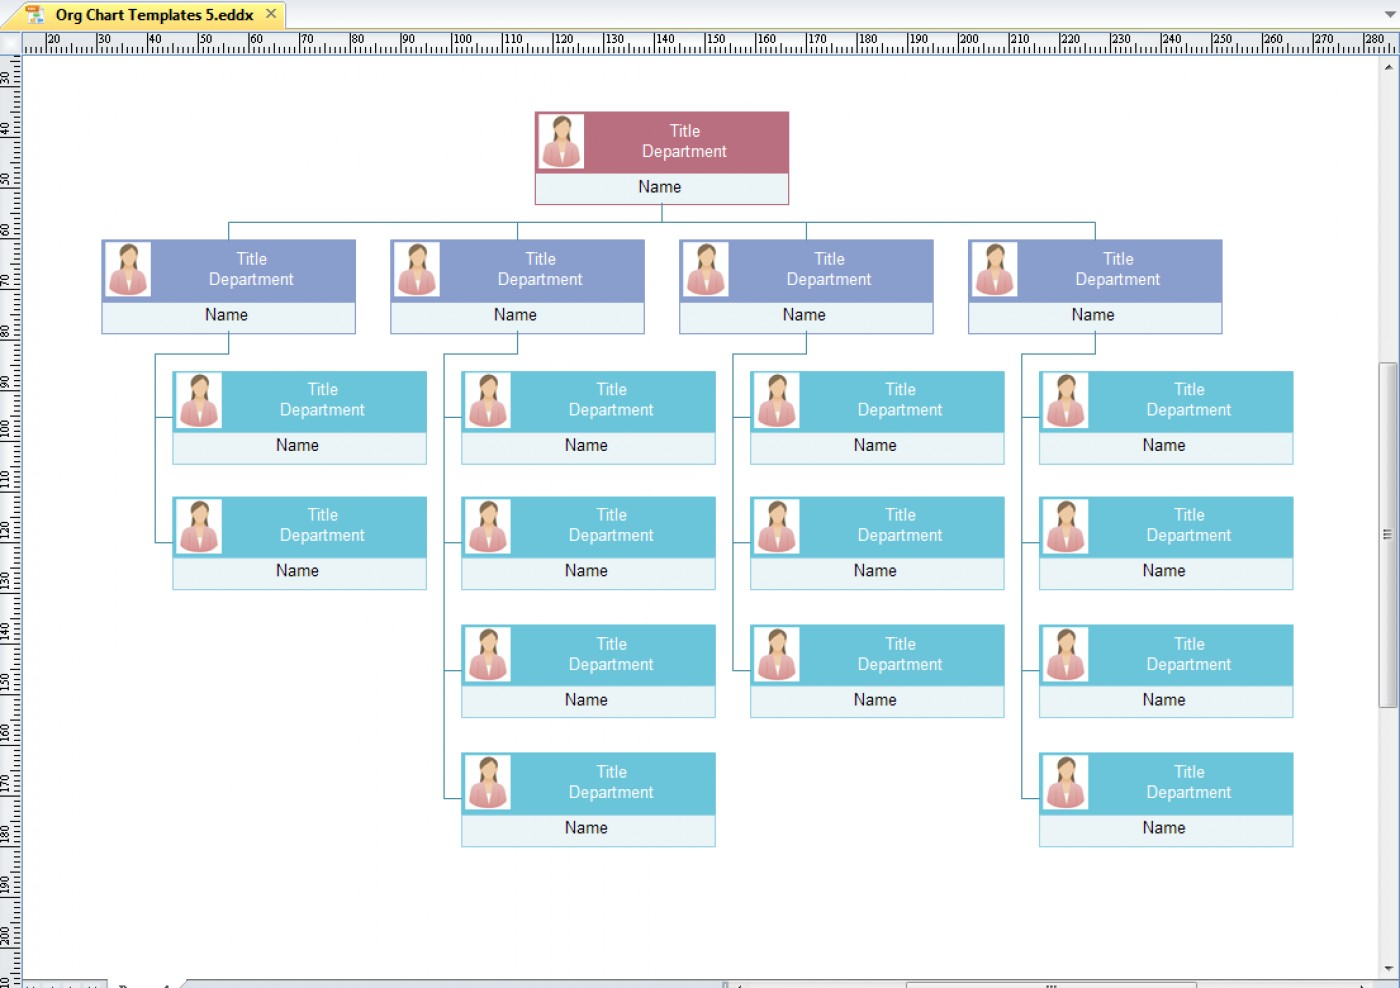 008 Org Chart In Word Csv Png Organization Template Excel With Regard To Org Chart Word Template